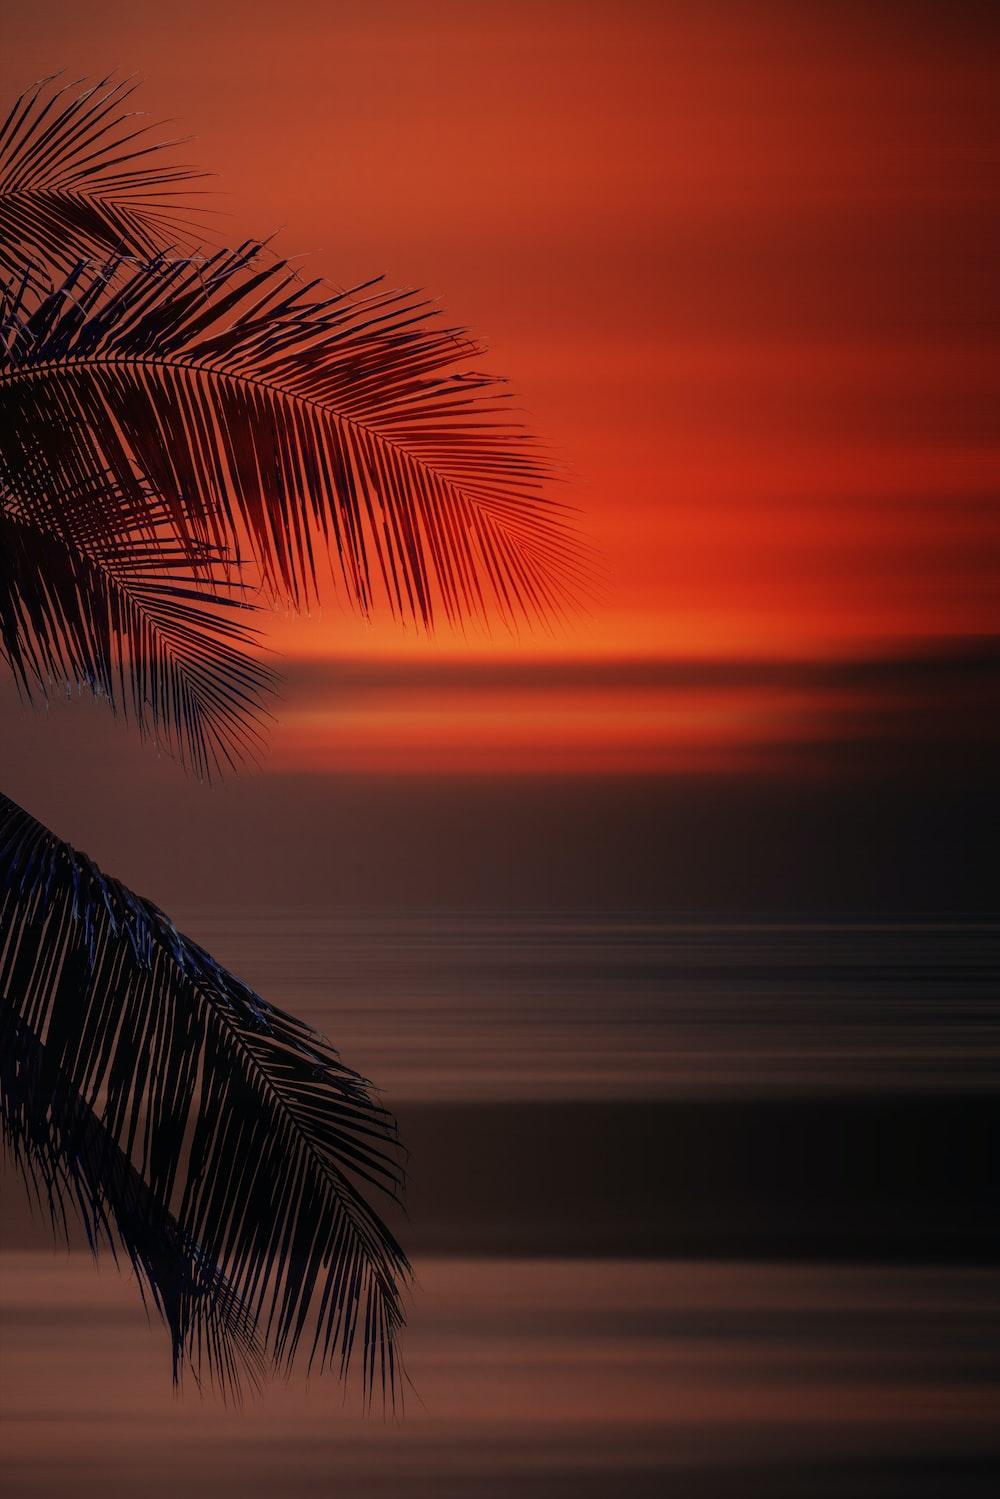 A Palm Tree In Front Of Sunset Photo Wallpaper Image On